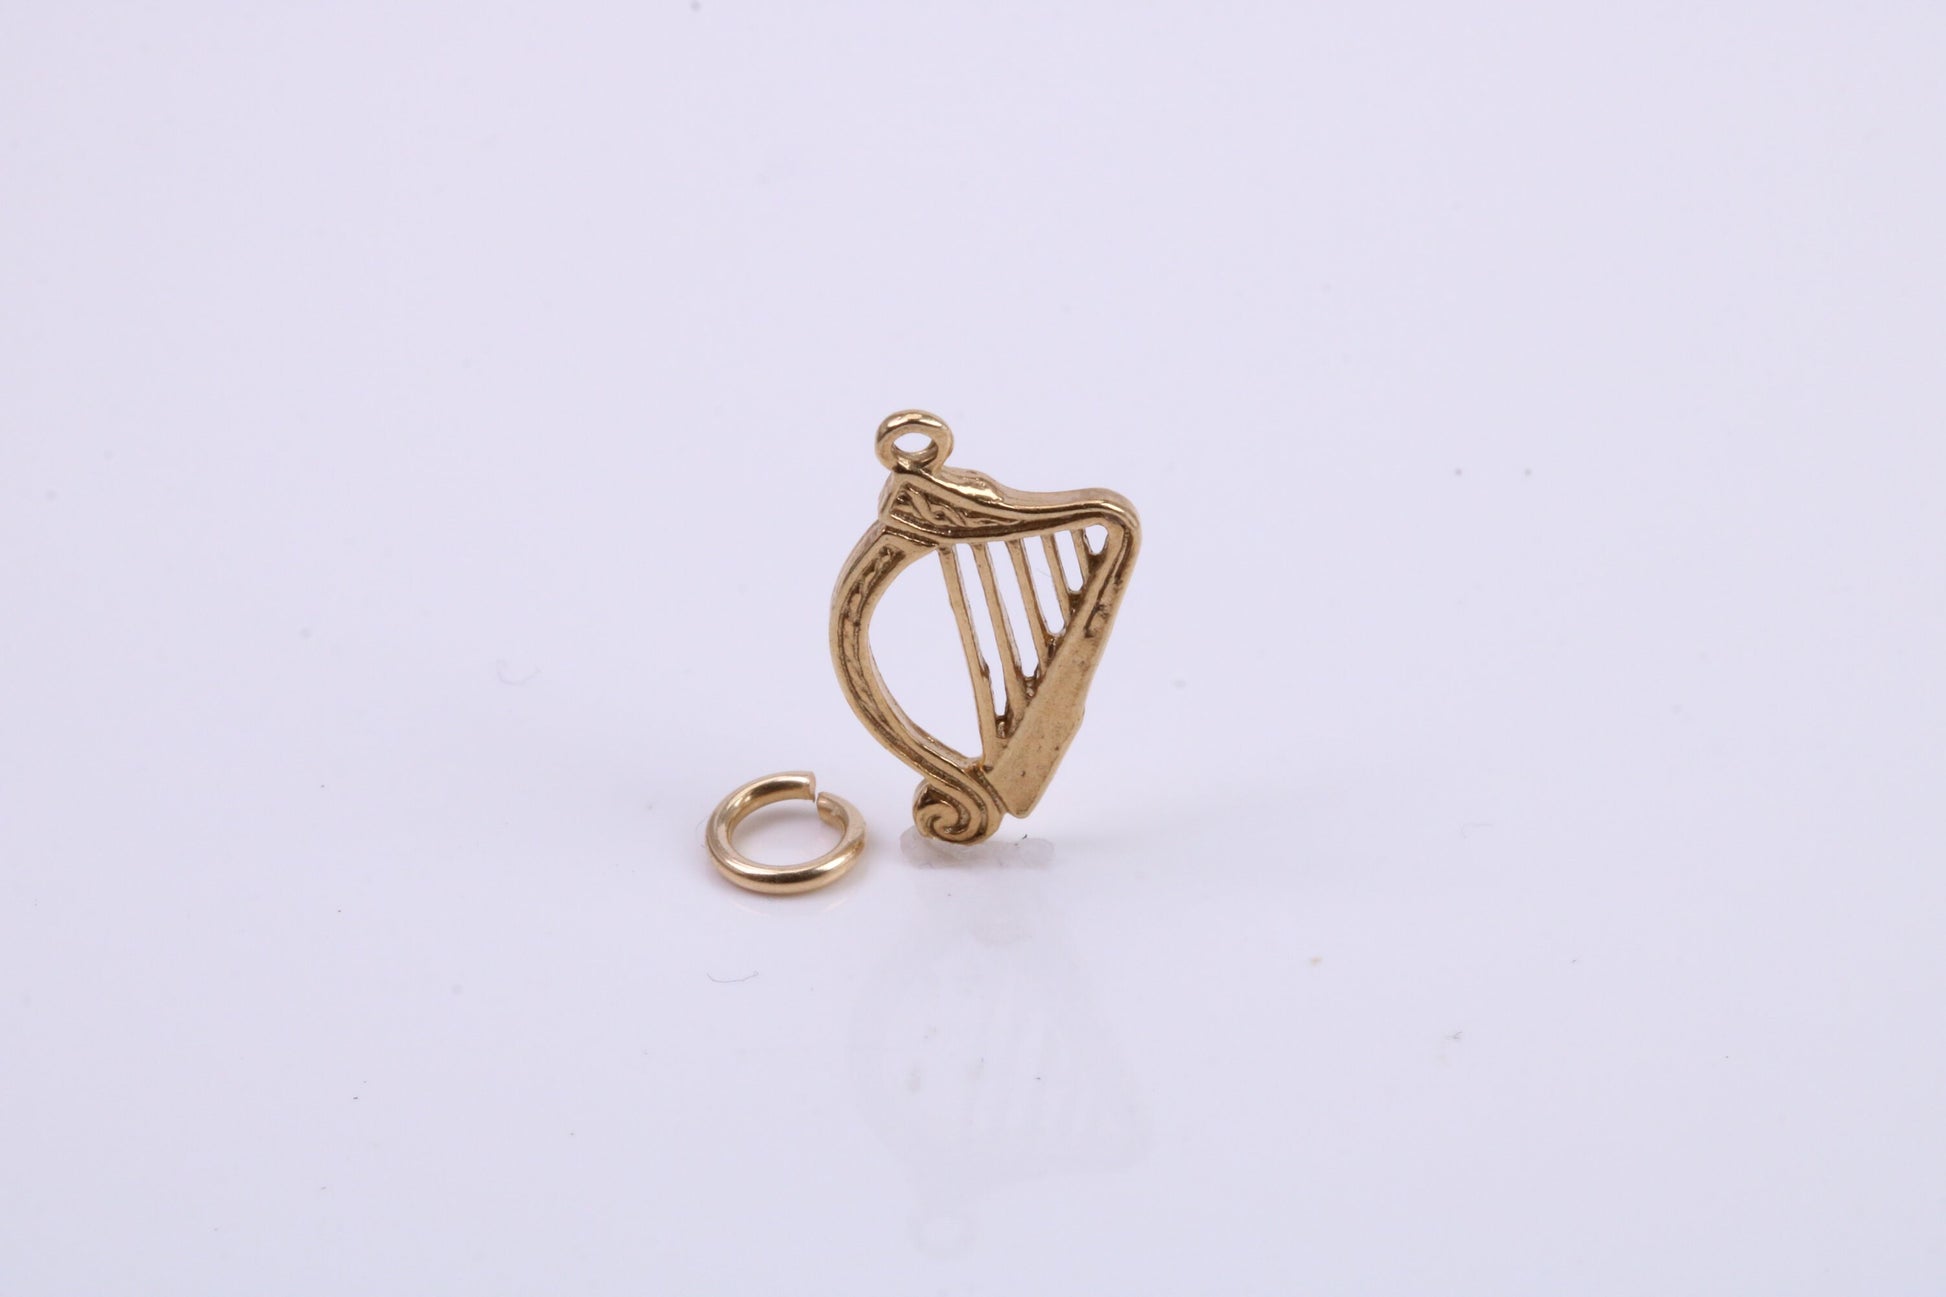 Harp Charm, Traditional Charm, Made from Solid 9ct Yellow Gold, British Hallmarked, Complete with Attachment Link